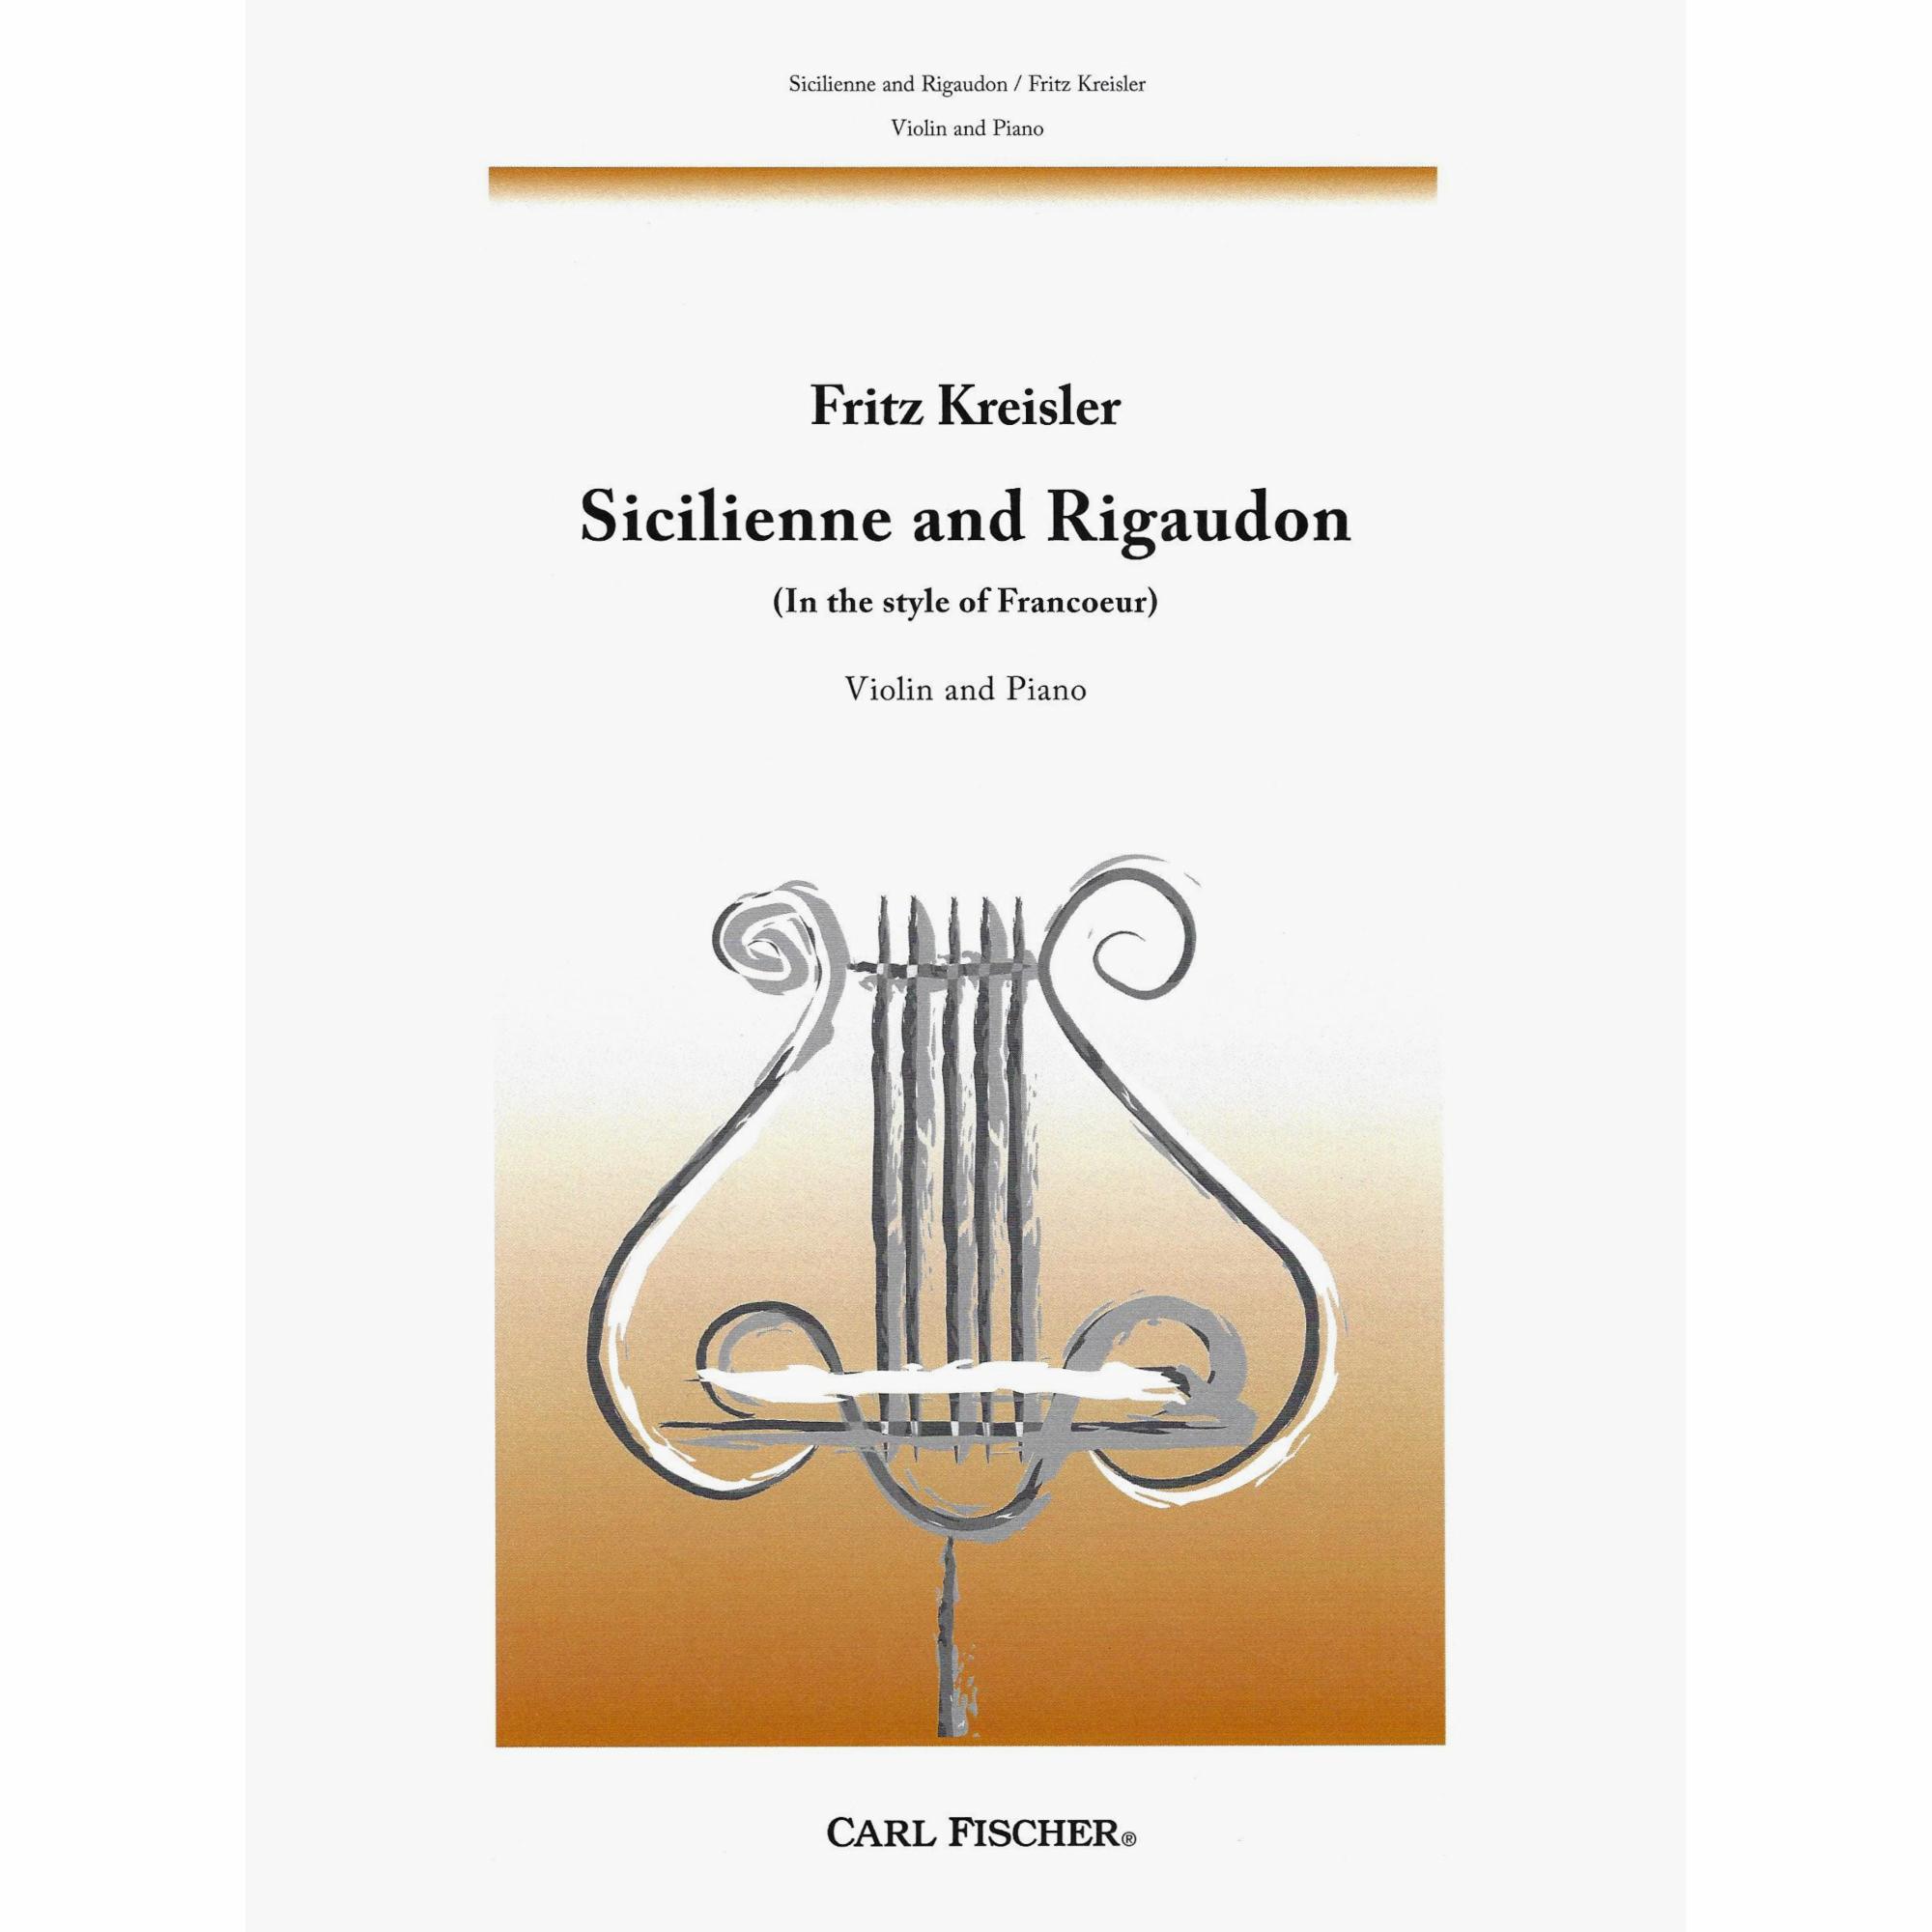 Kreisler -- Sicilienne and Rigaudon for Violin and Piano